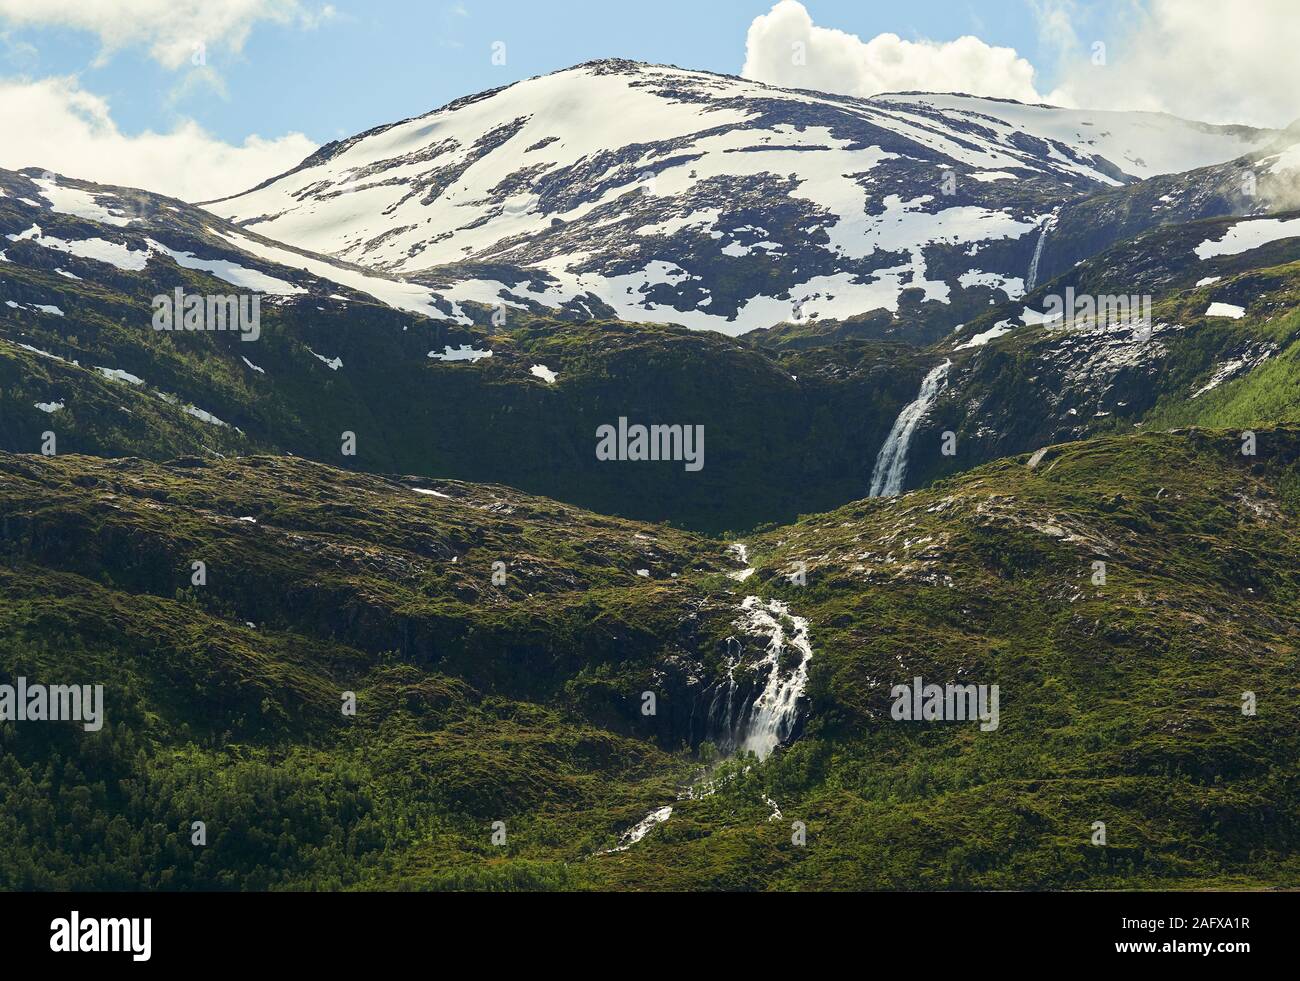 Northern landscape with  mountains and forest at the foreground and mountain peak and waterfall on the background. Senja Island, Troms County, Norway. Stock Photo